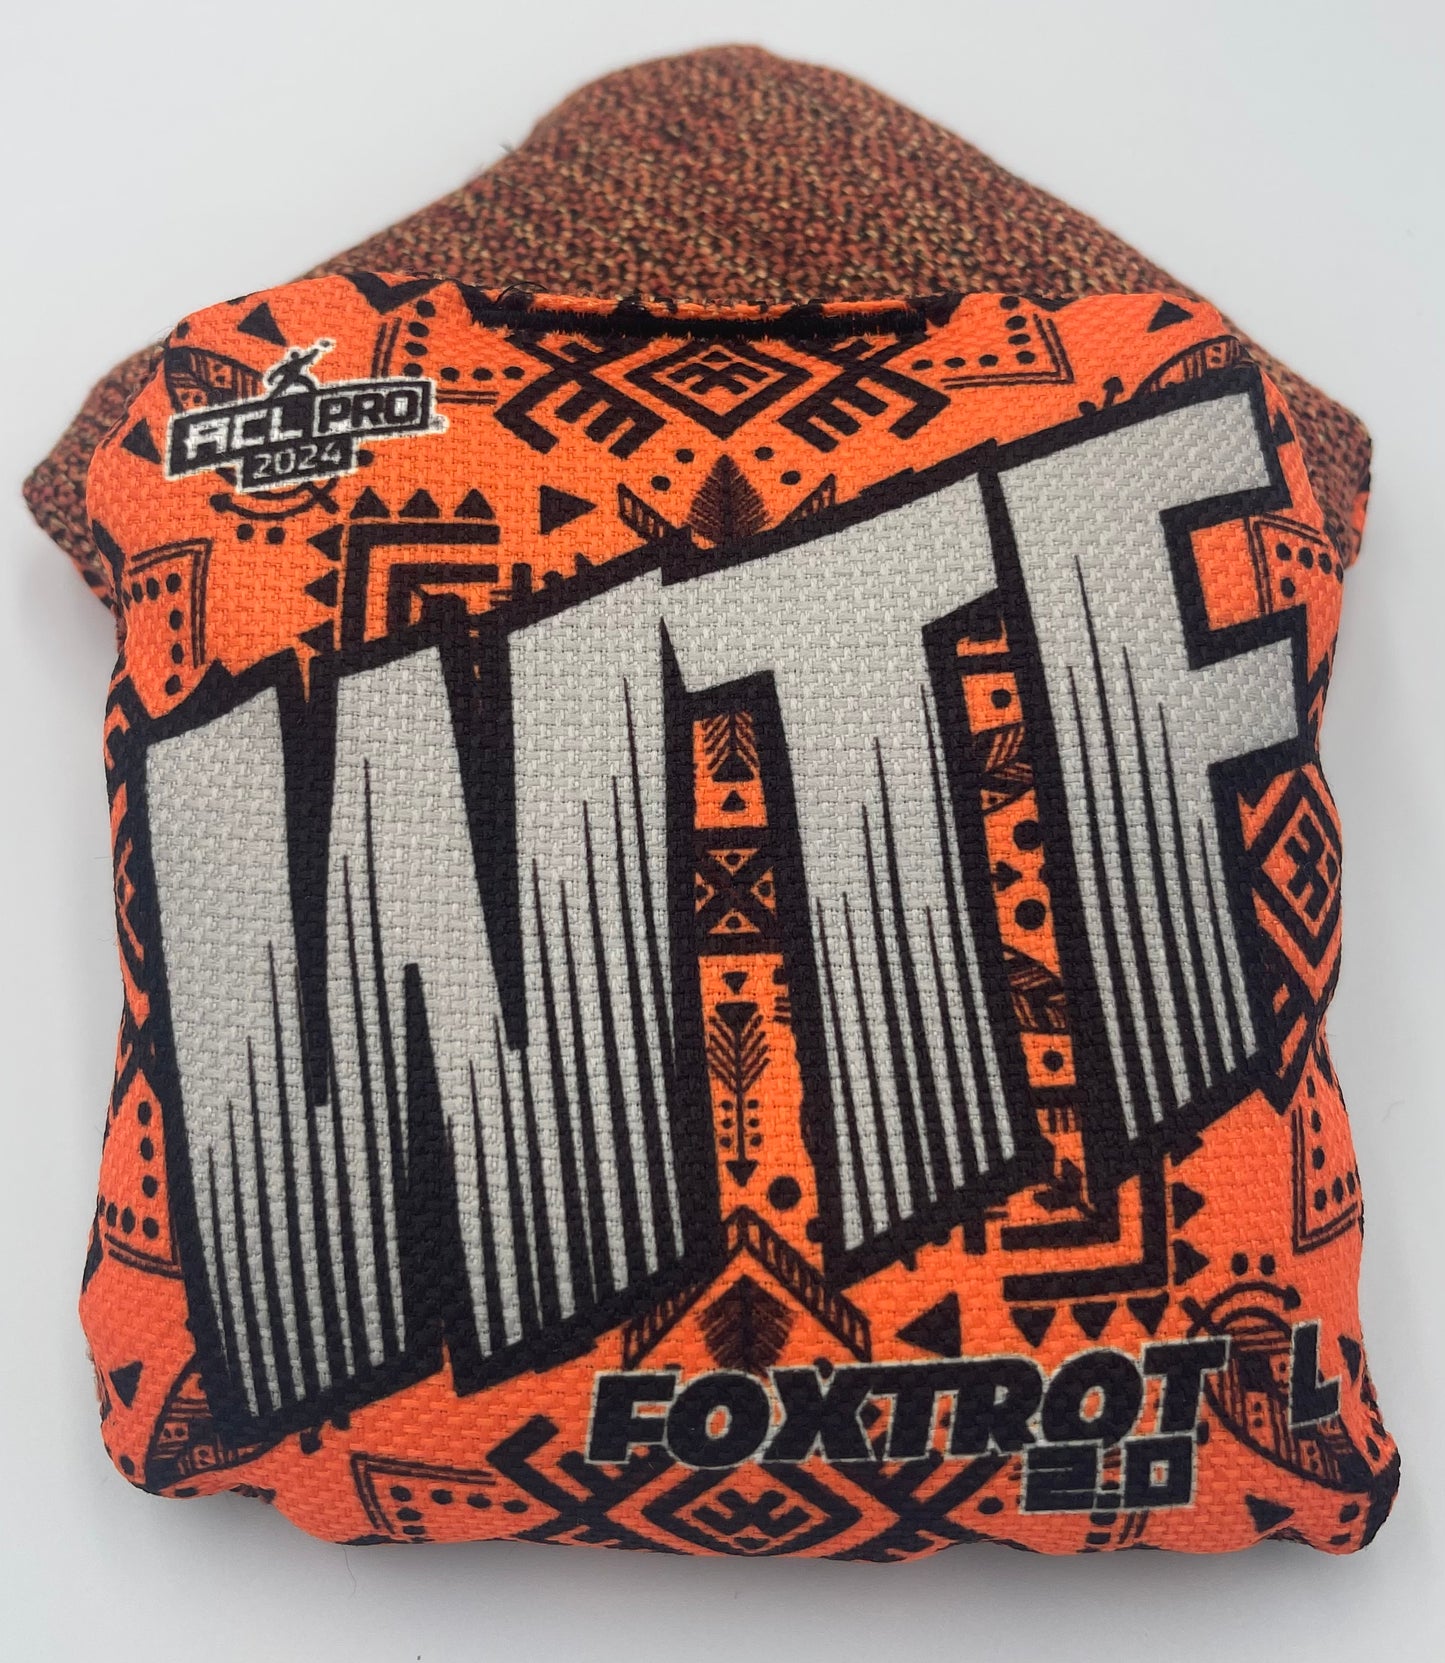 Foxtrot 2.0 L - ACL Pro Stamped Cornhole Bags - Set of 4 bags